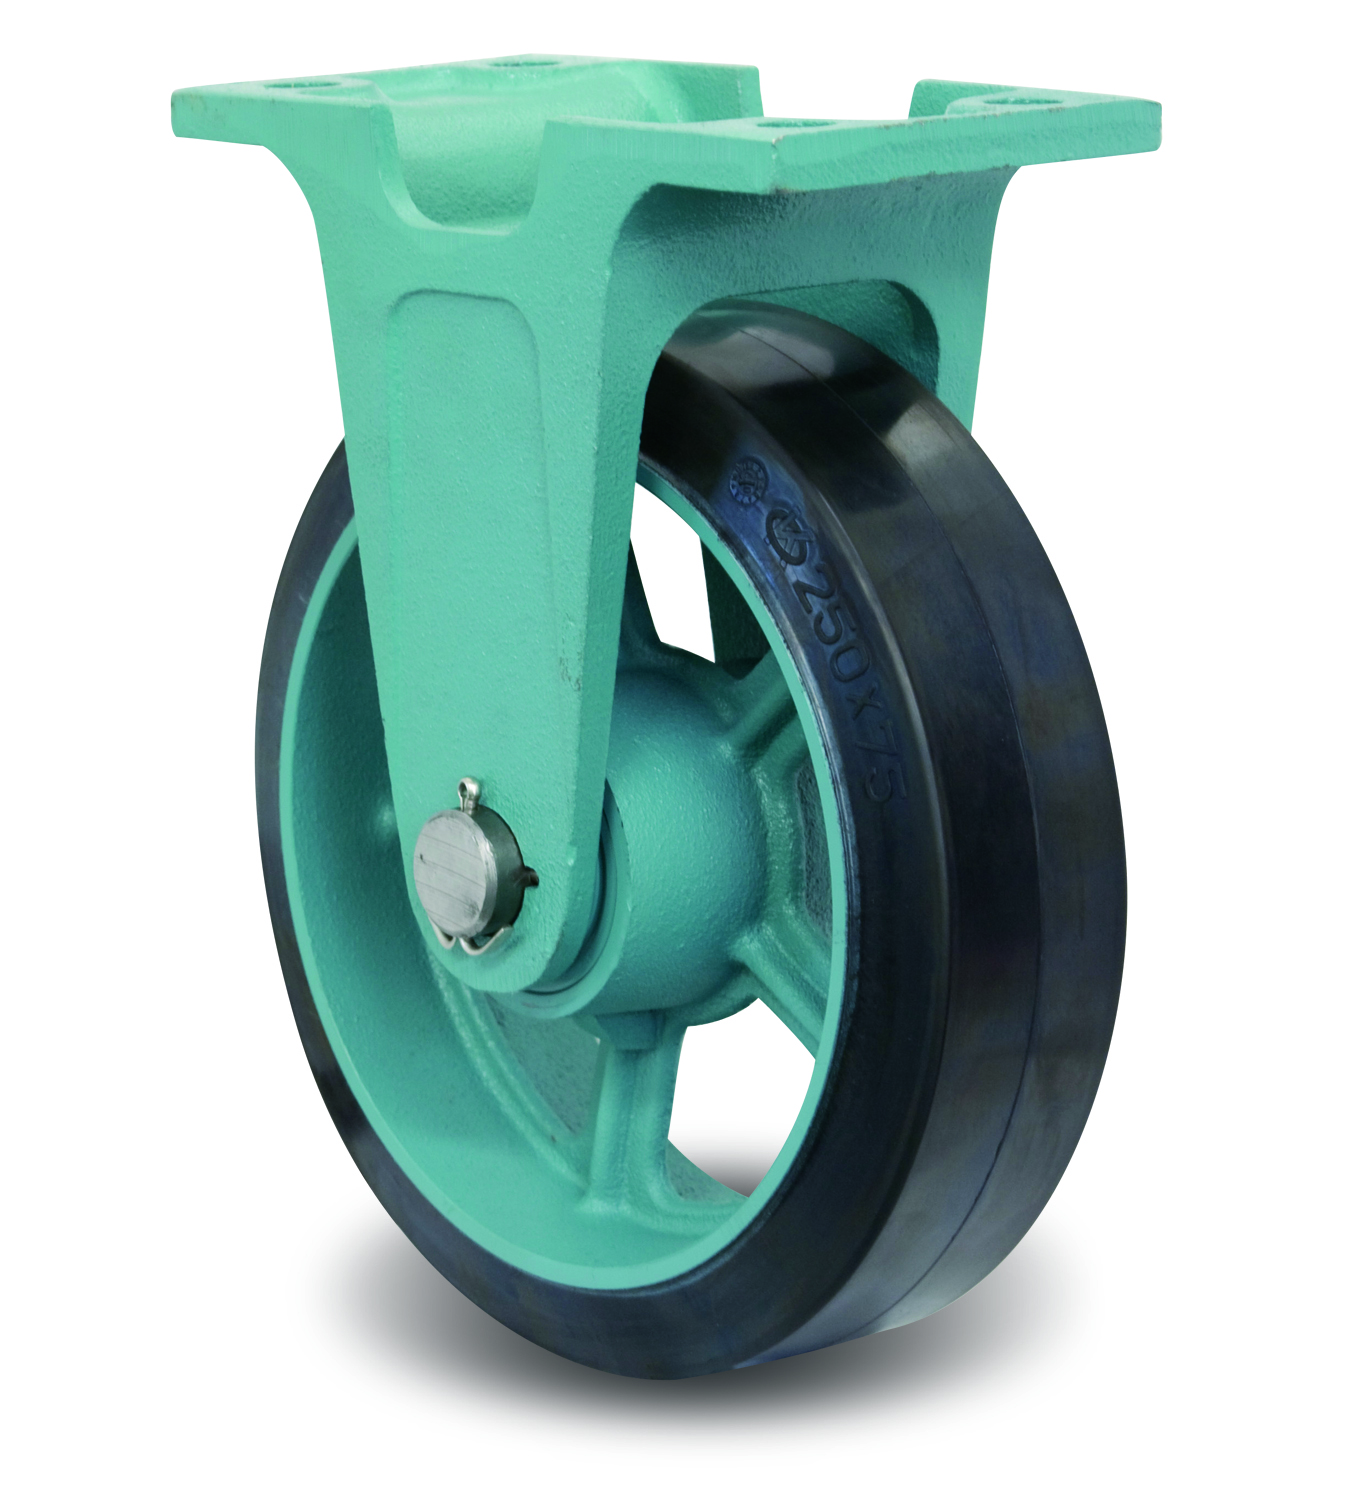 Ductile Caster Wide Type, Fixed MG-W Metal Fittings, E-MG-W (EMG-W130X65) 